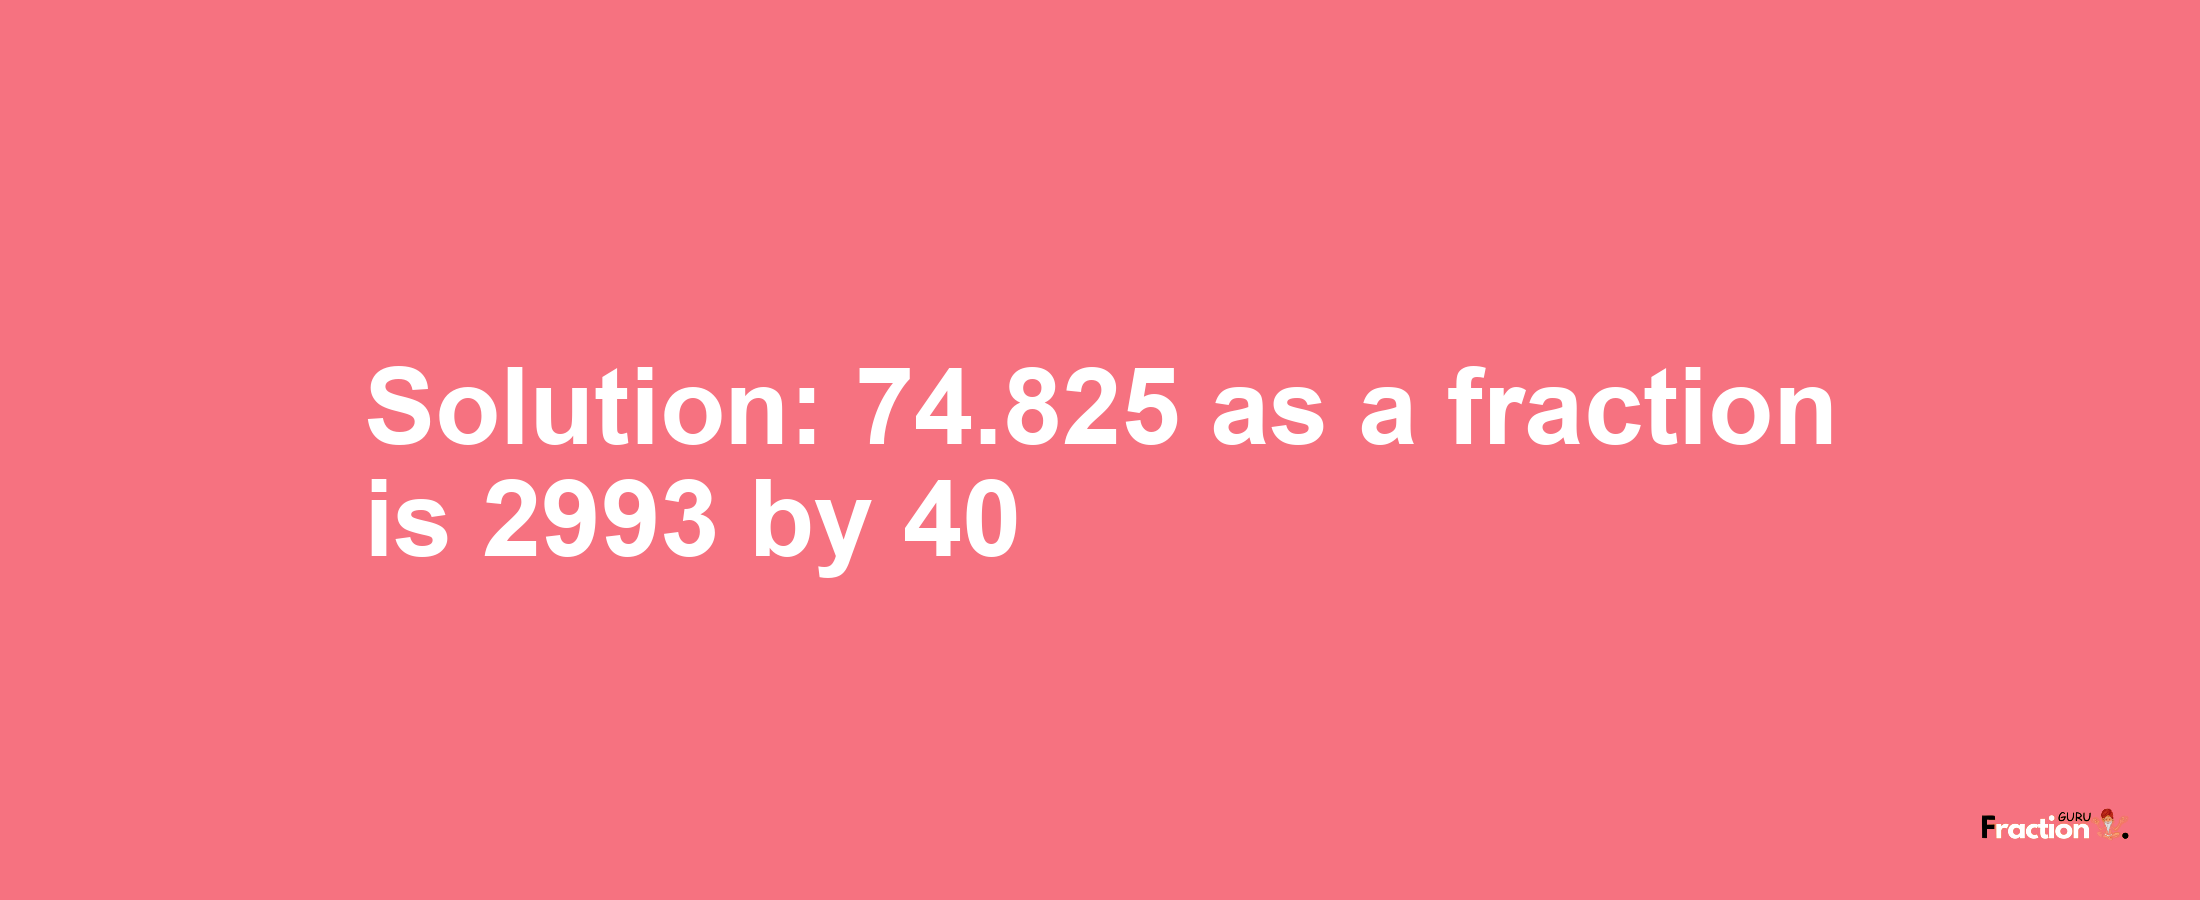 Solution:74.825 as a fraction is 2993/40